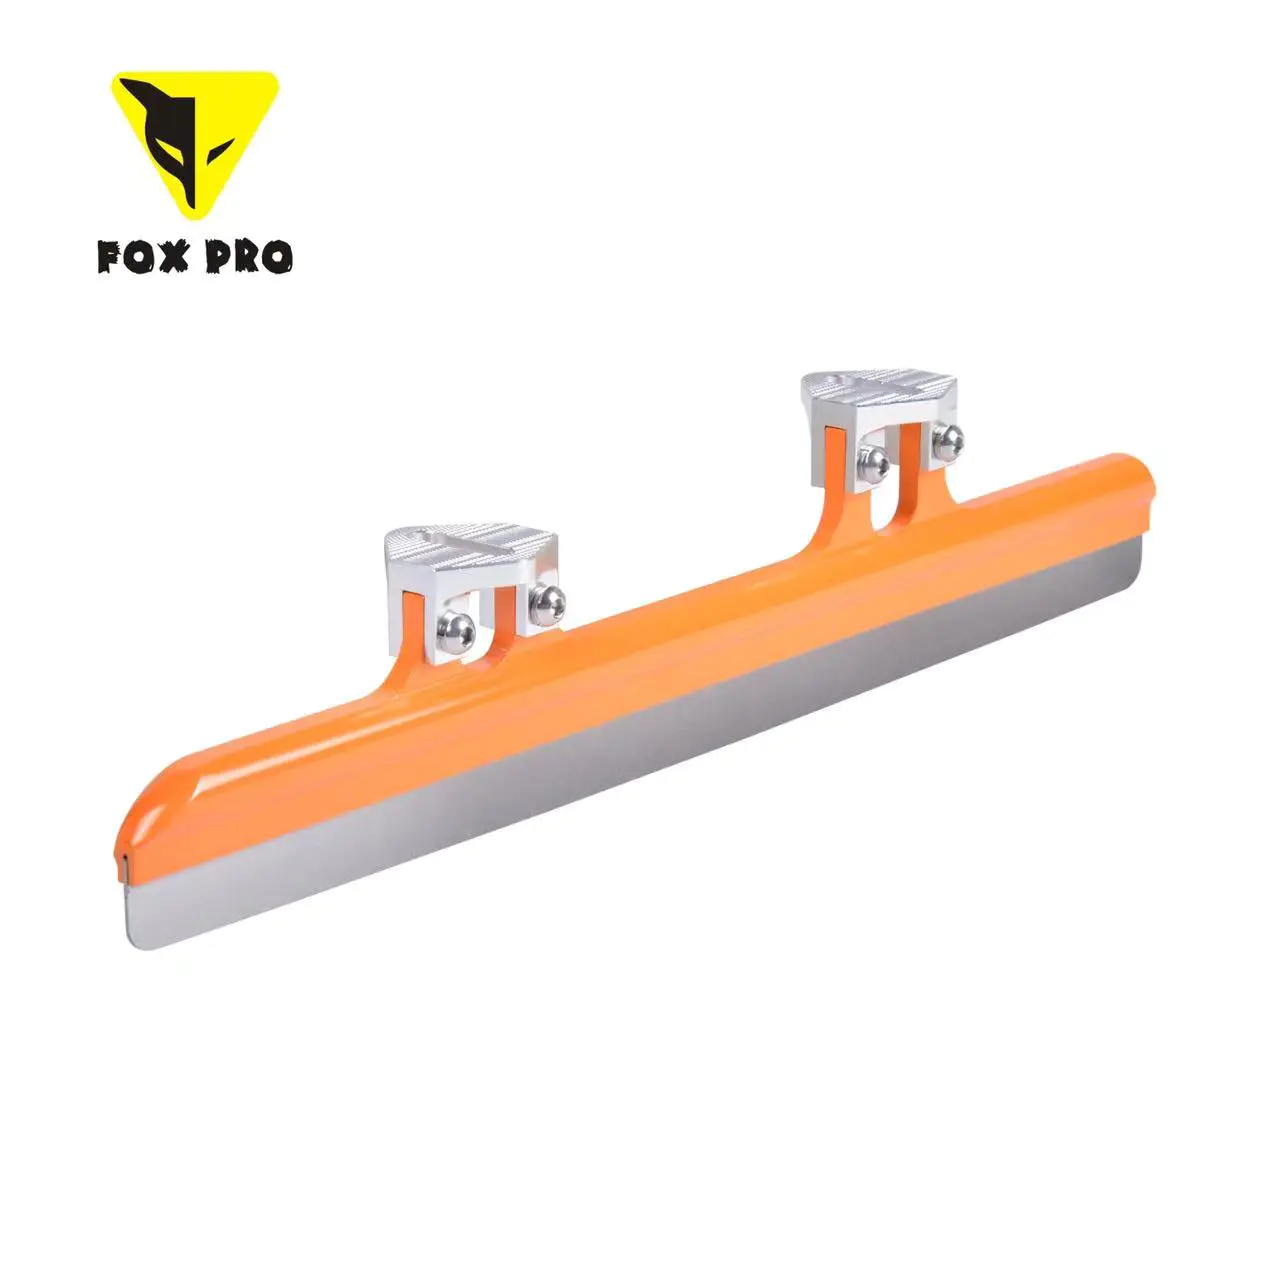 FOX PRO 61 HRC Short Track Ice Skate Blades CNC Aluminum 7005 Ice Skate Blades For professional competition